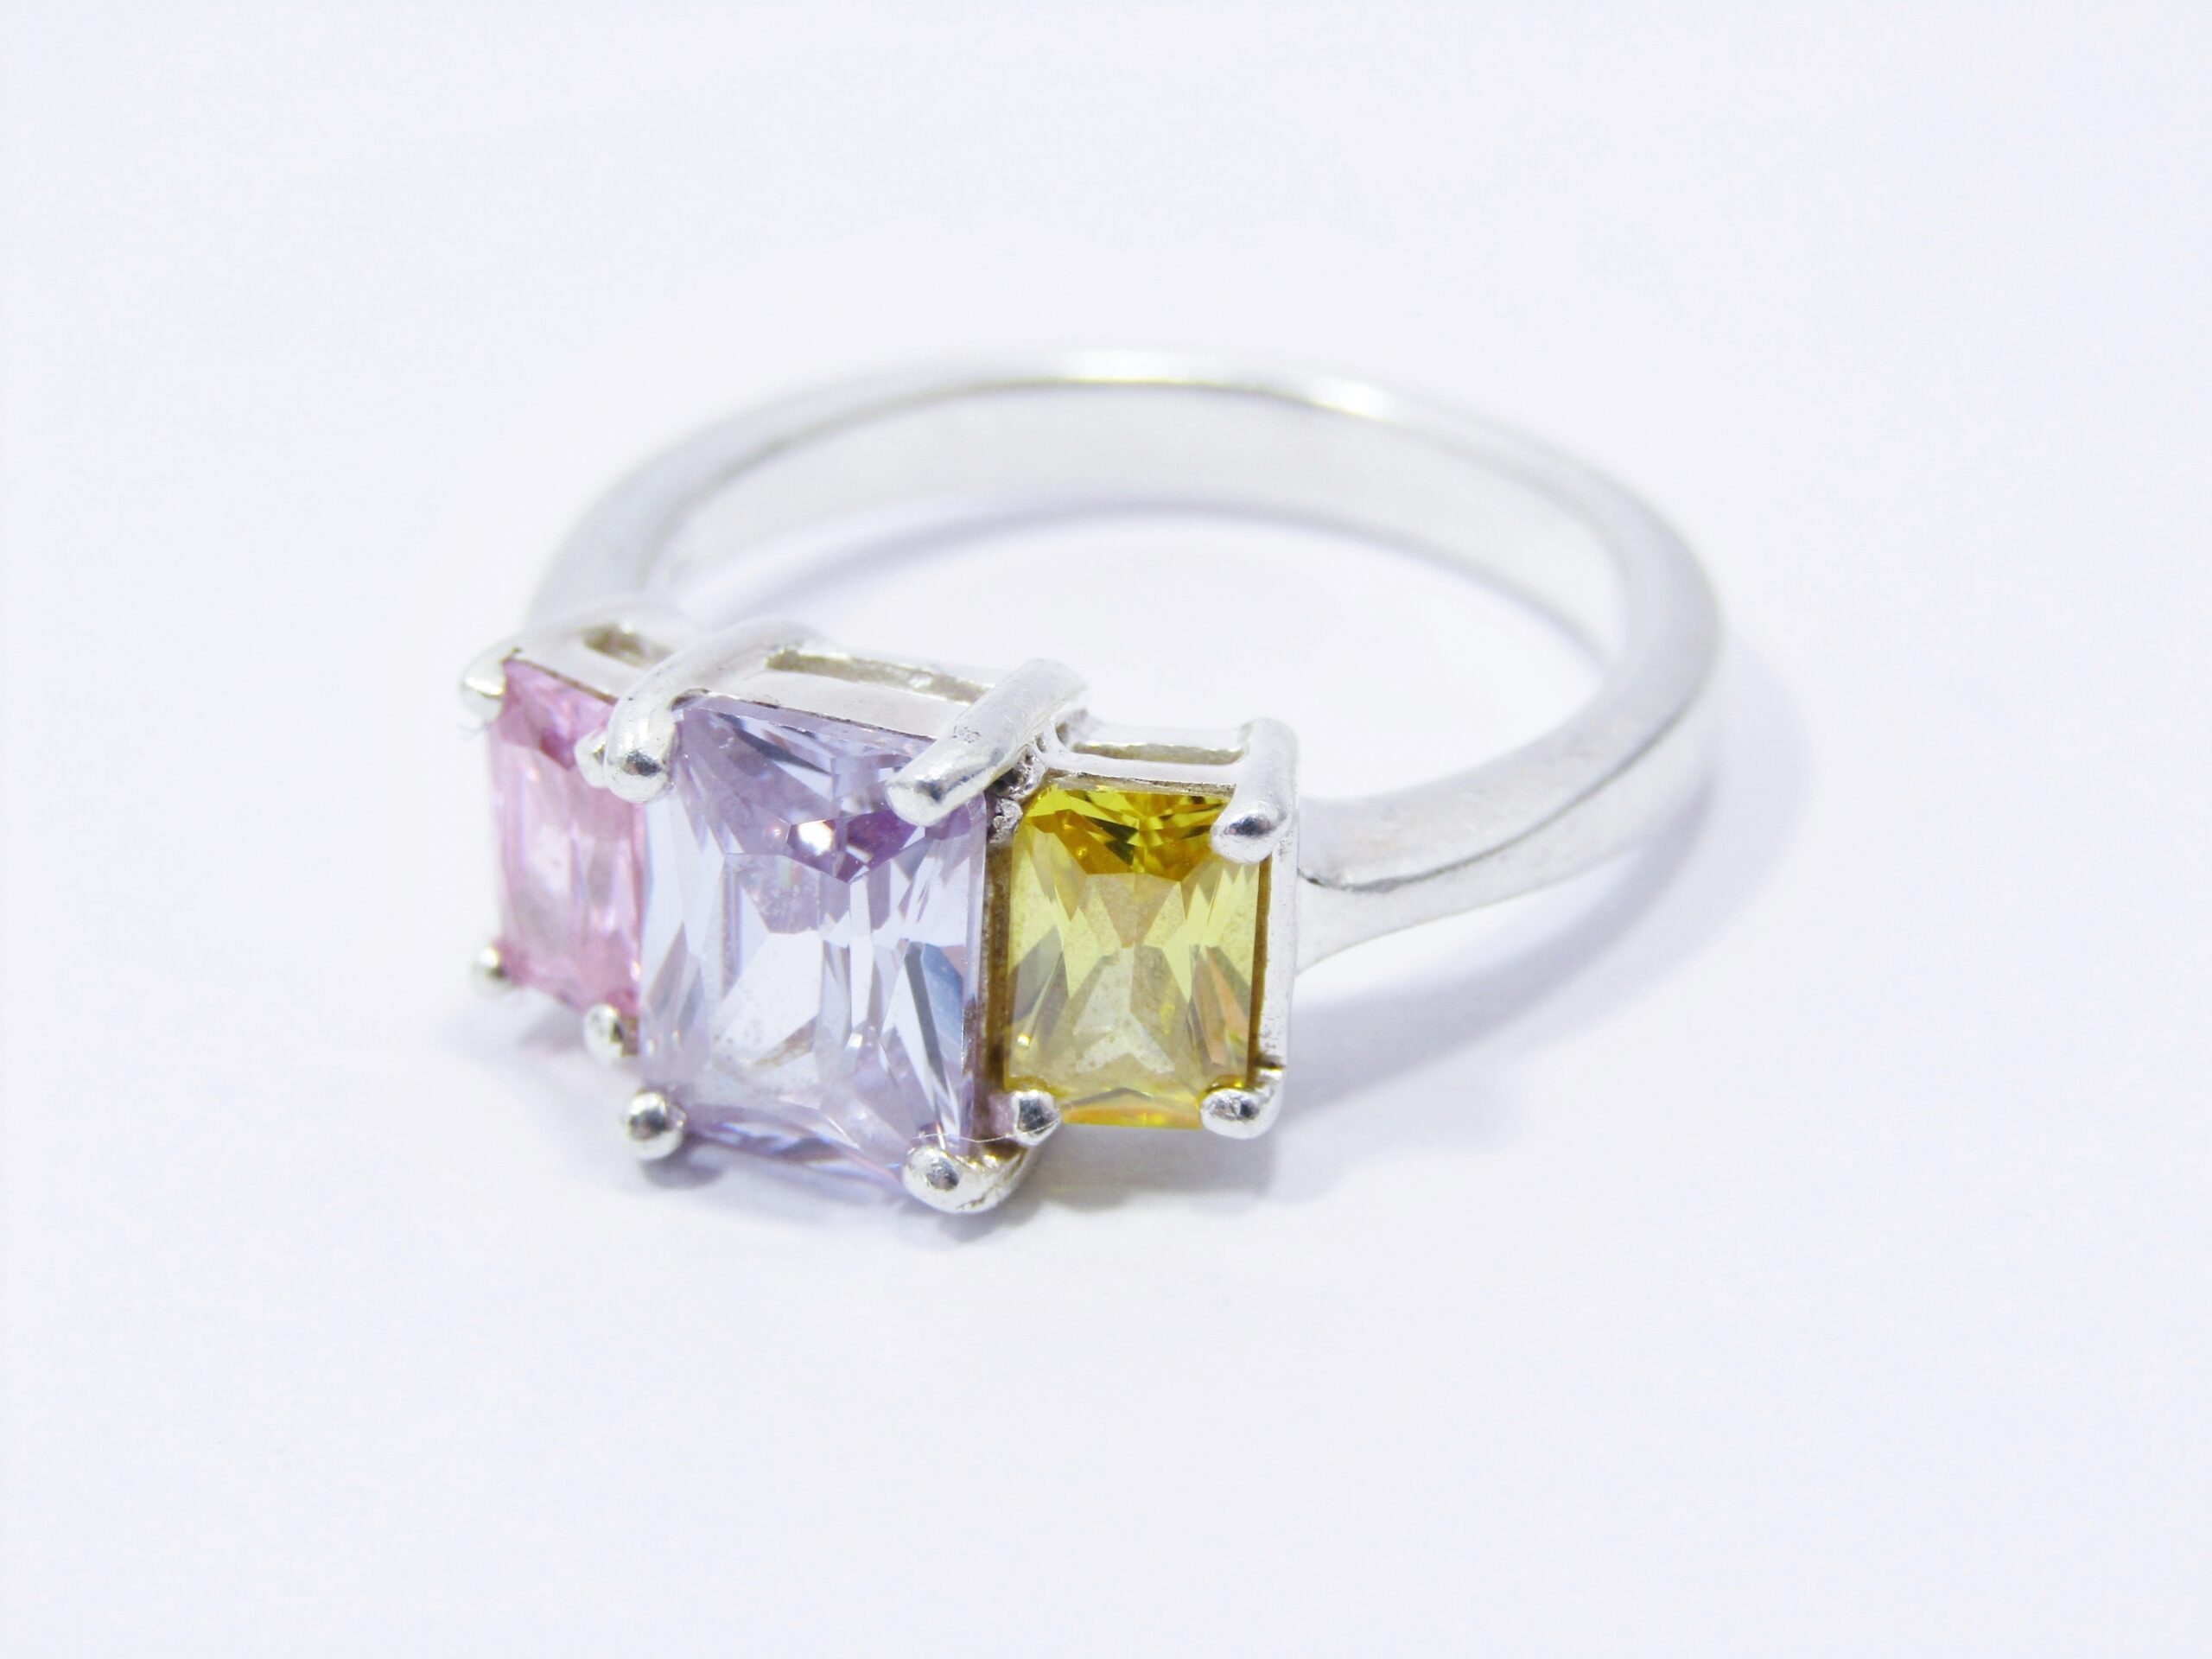 A Very Pretty Trilogy Design Zirconia Ring in Sterling Silver.